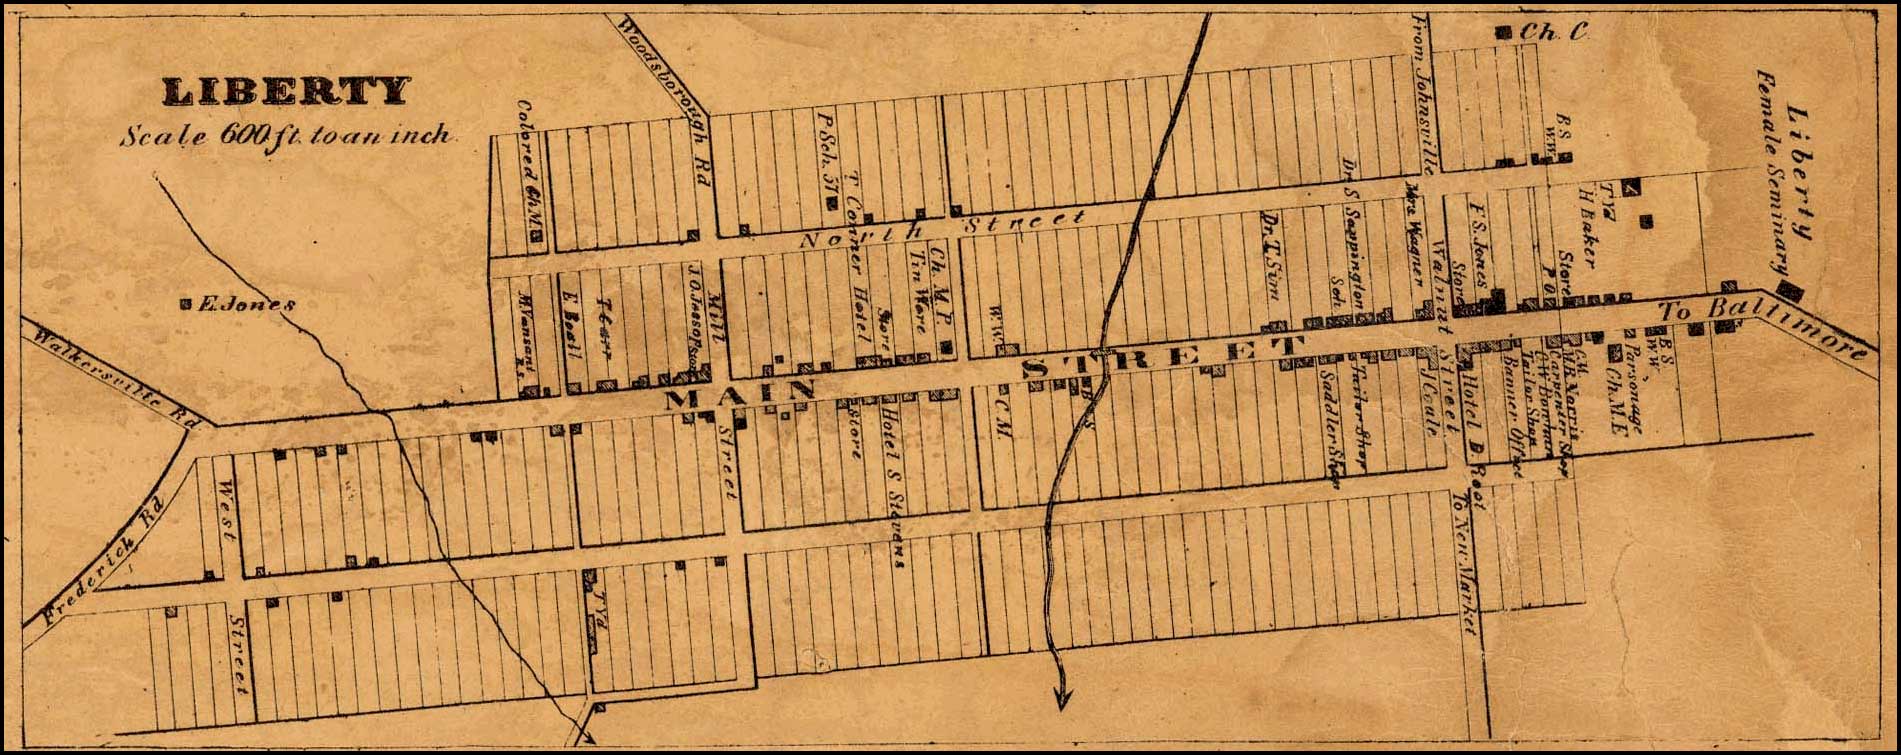 Detail of Liberty from Isaac Bond, Map of Frederick County, 1858, Library of Congress, MSA SC 1213-1-457